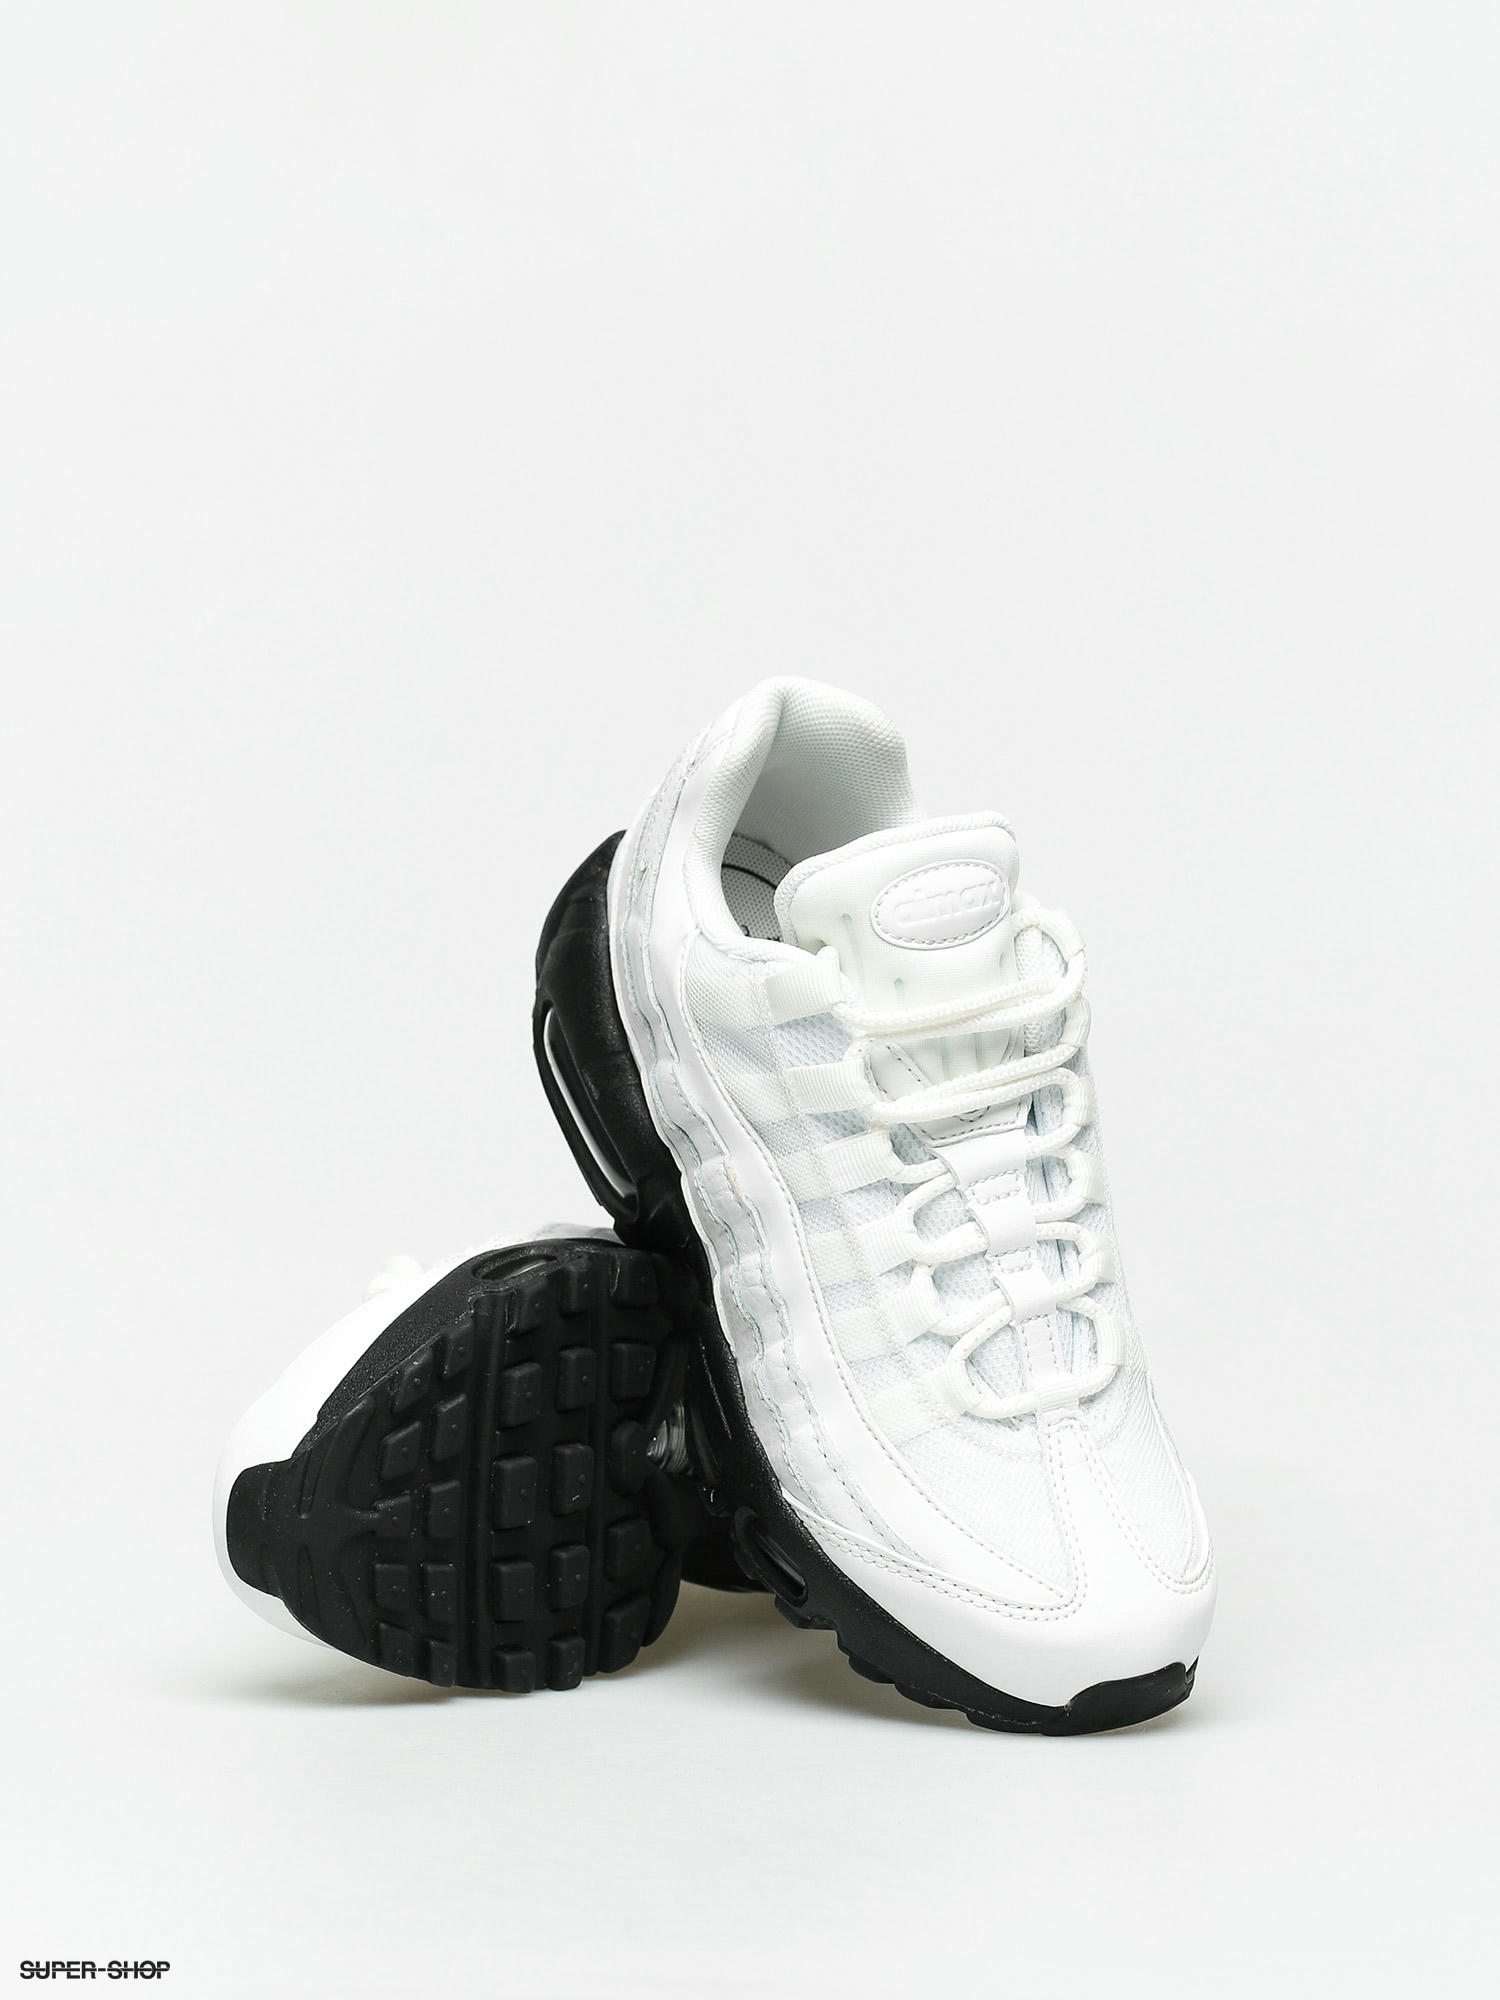 Nike Air Max 95 Special Edition Shoes 